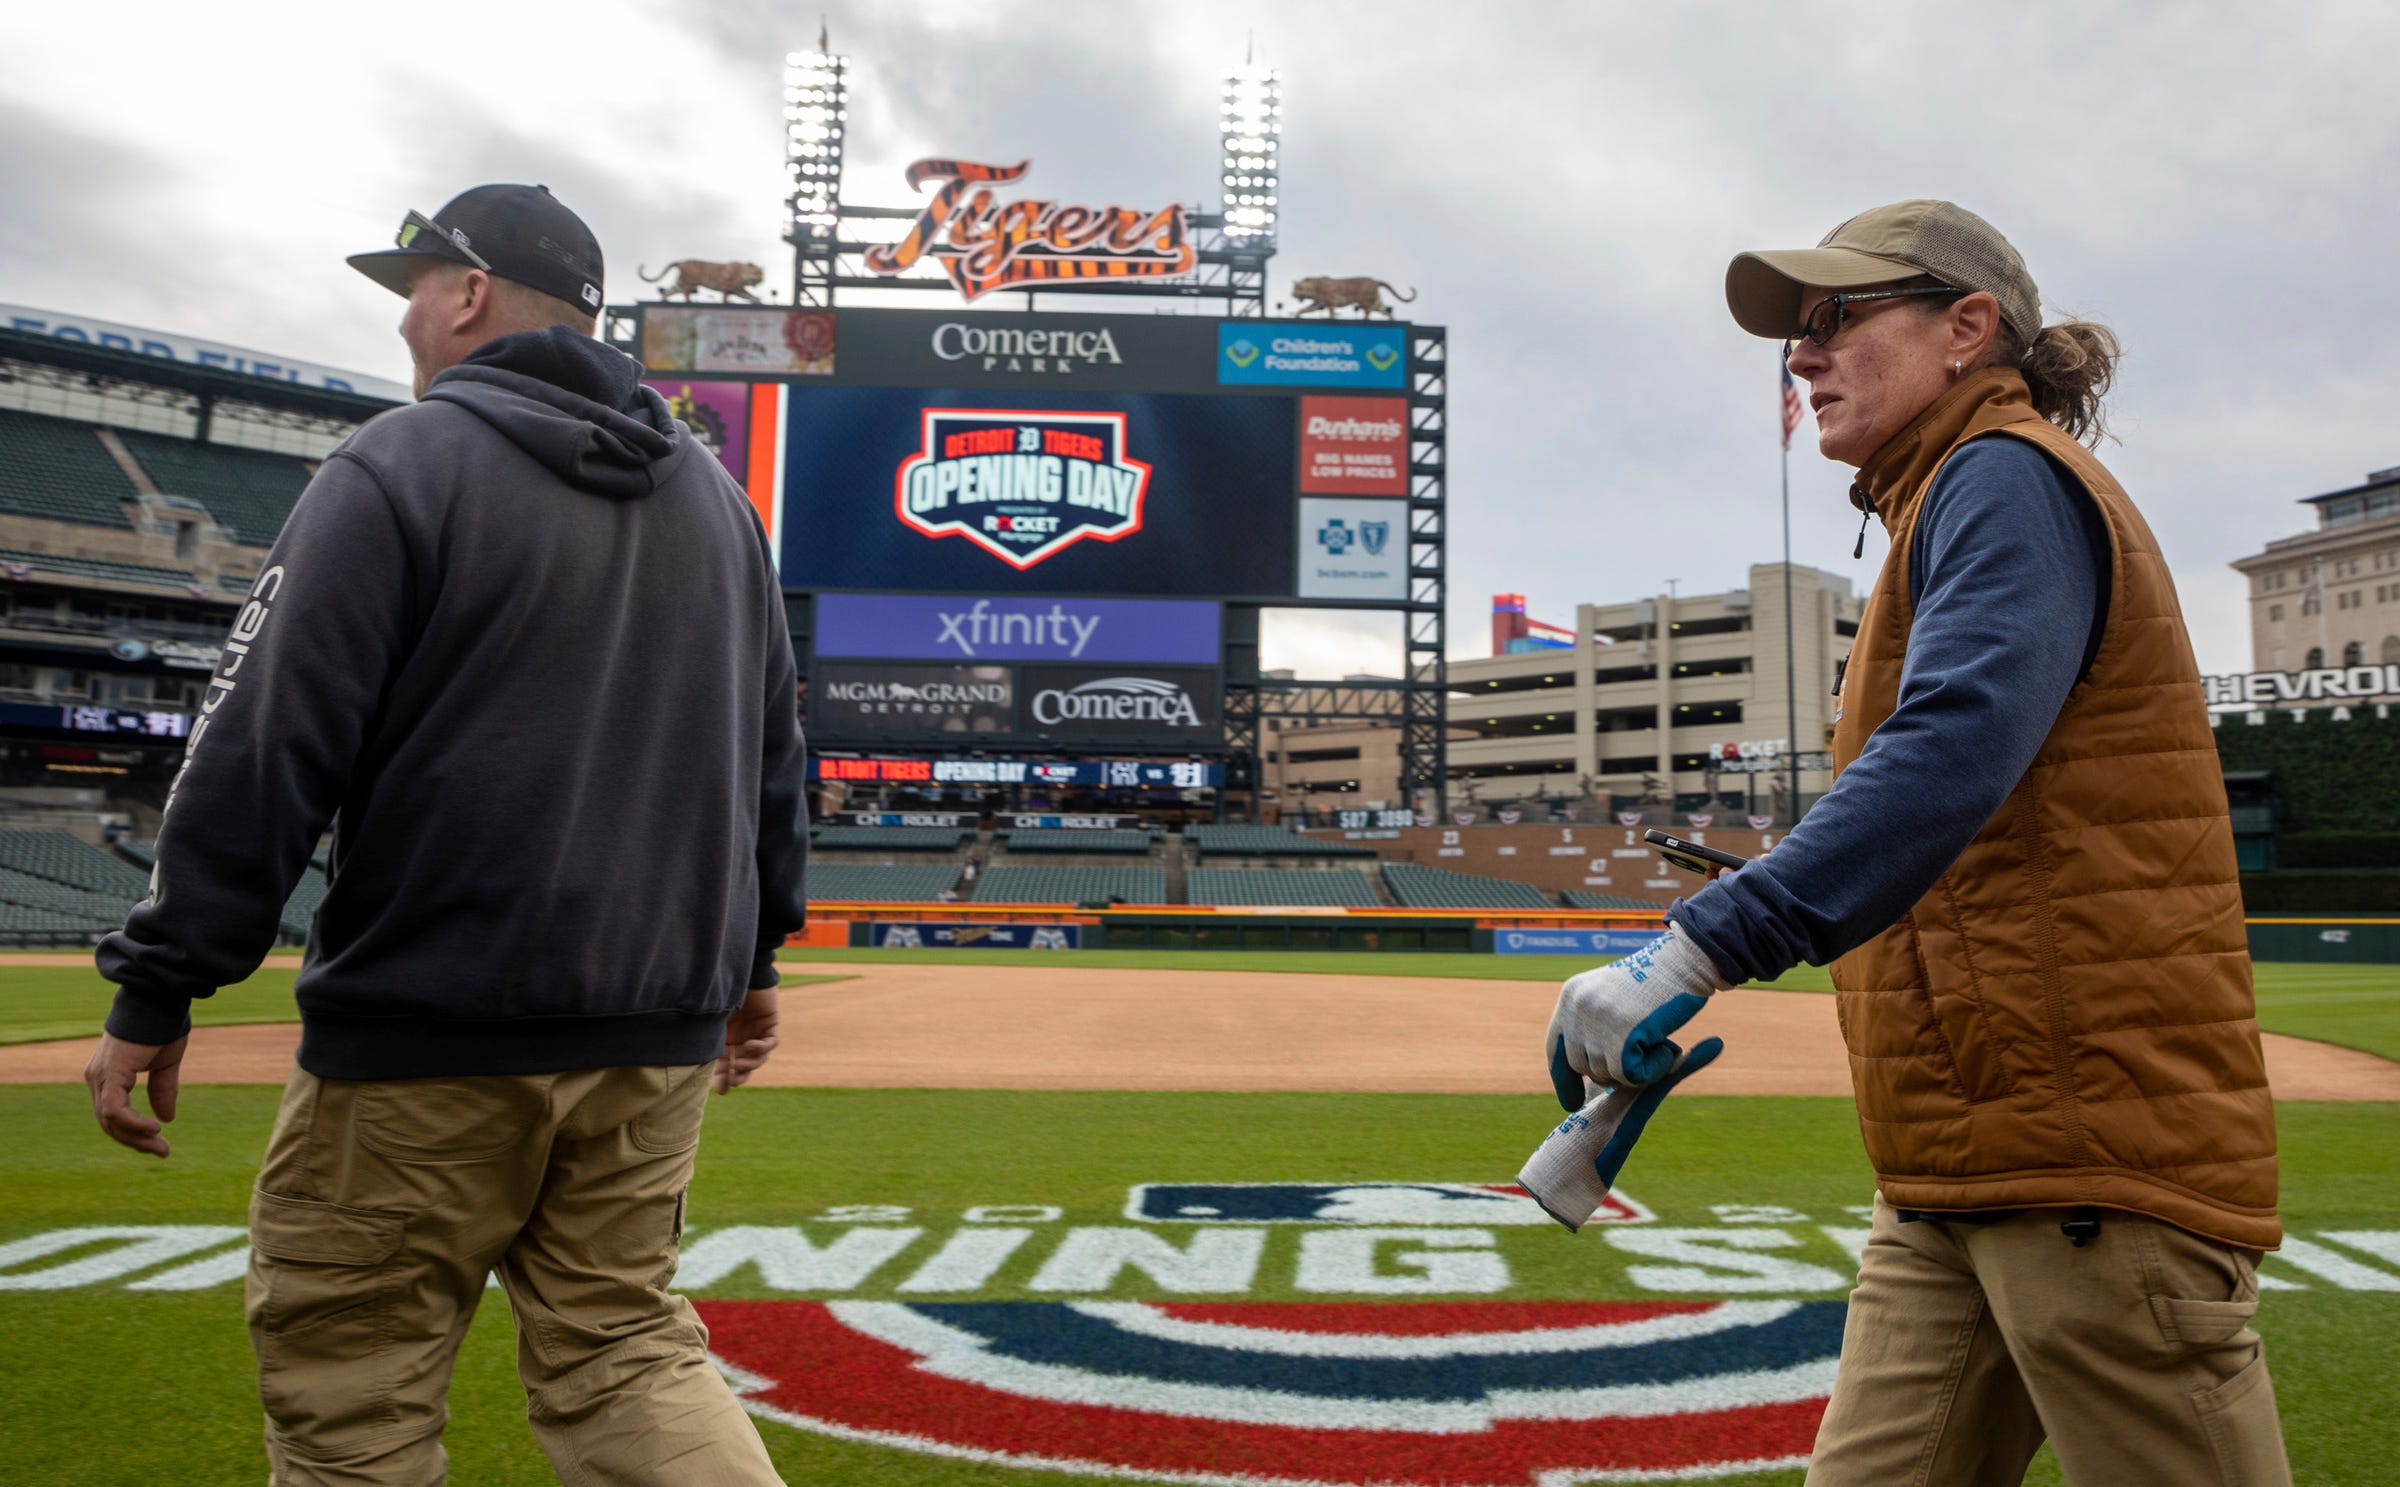 Heather Nabozny, the head groundkeeper for the Detroit Tigers, walks on the field during the Detroit Tigers' Opening Day at Comerica Park in Detroit on Thursday, April 6, 2023.